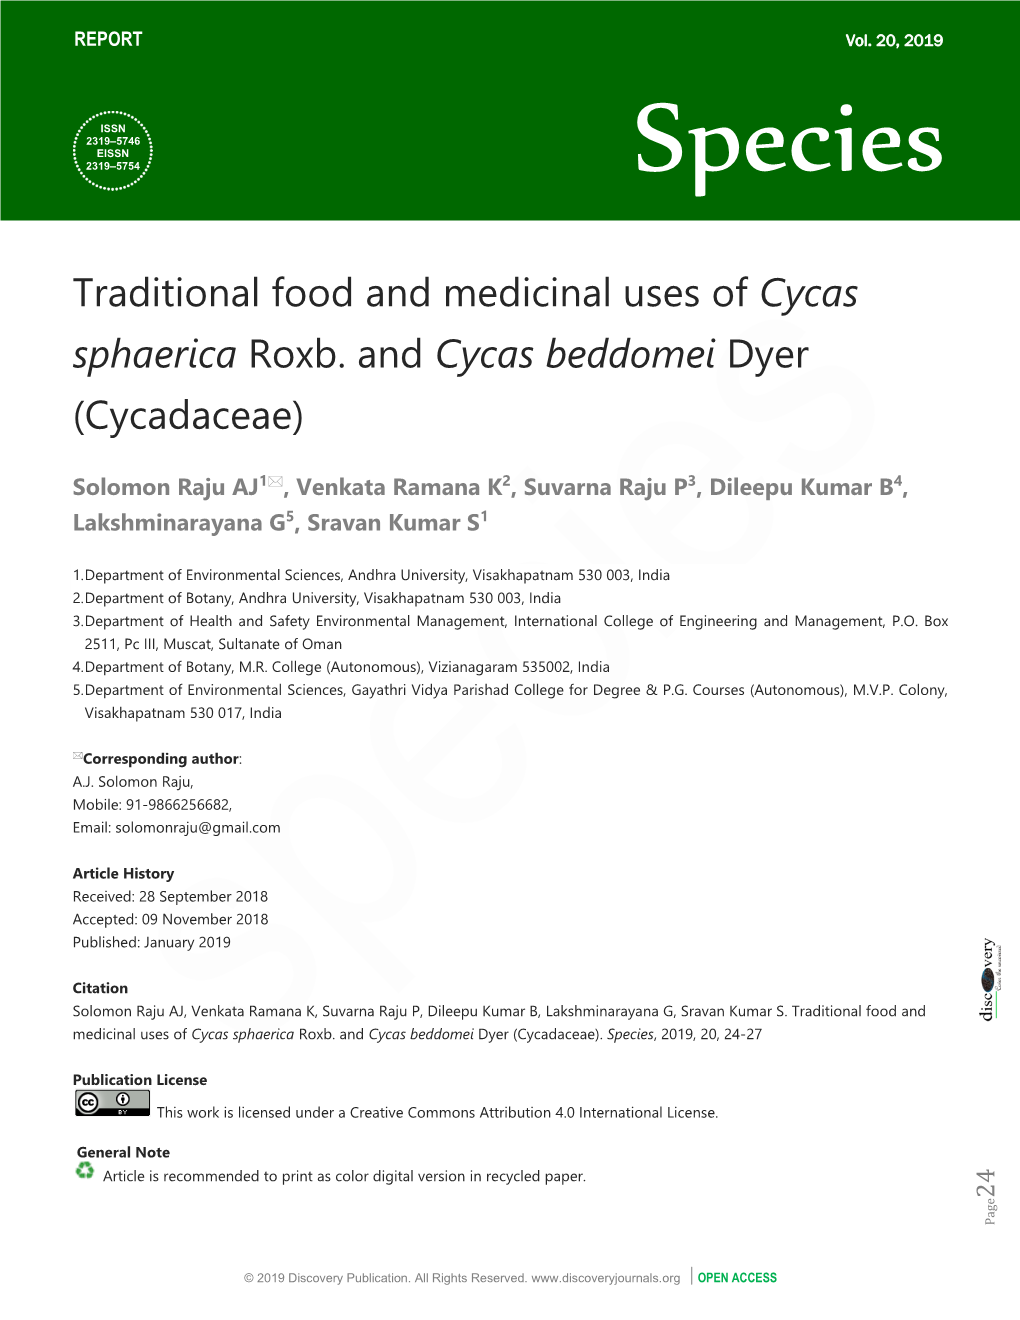 Traditional Food and Medicinal Uses of Cycas Sphaerica Roxb. and Cycas Beddomei Dyer (Cycadaceae)